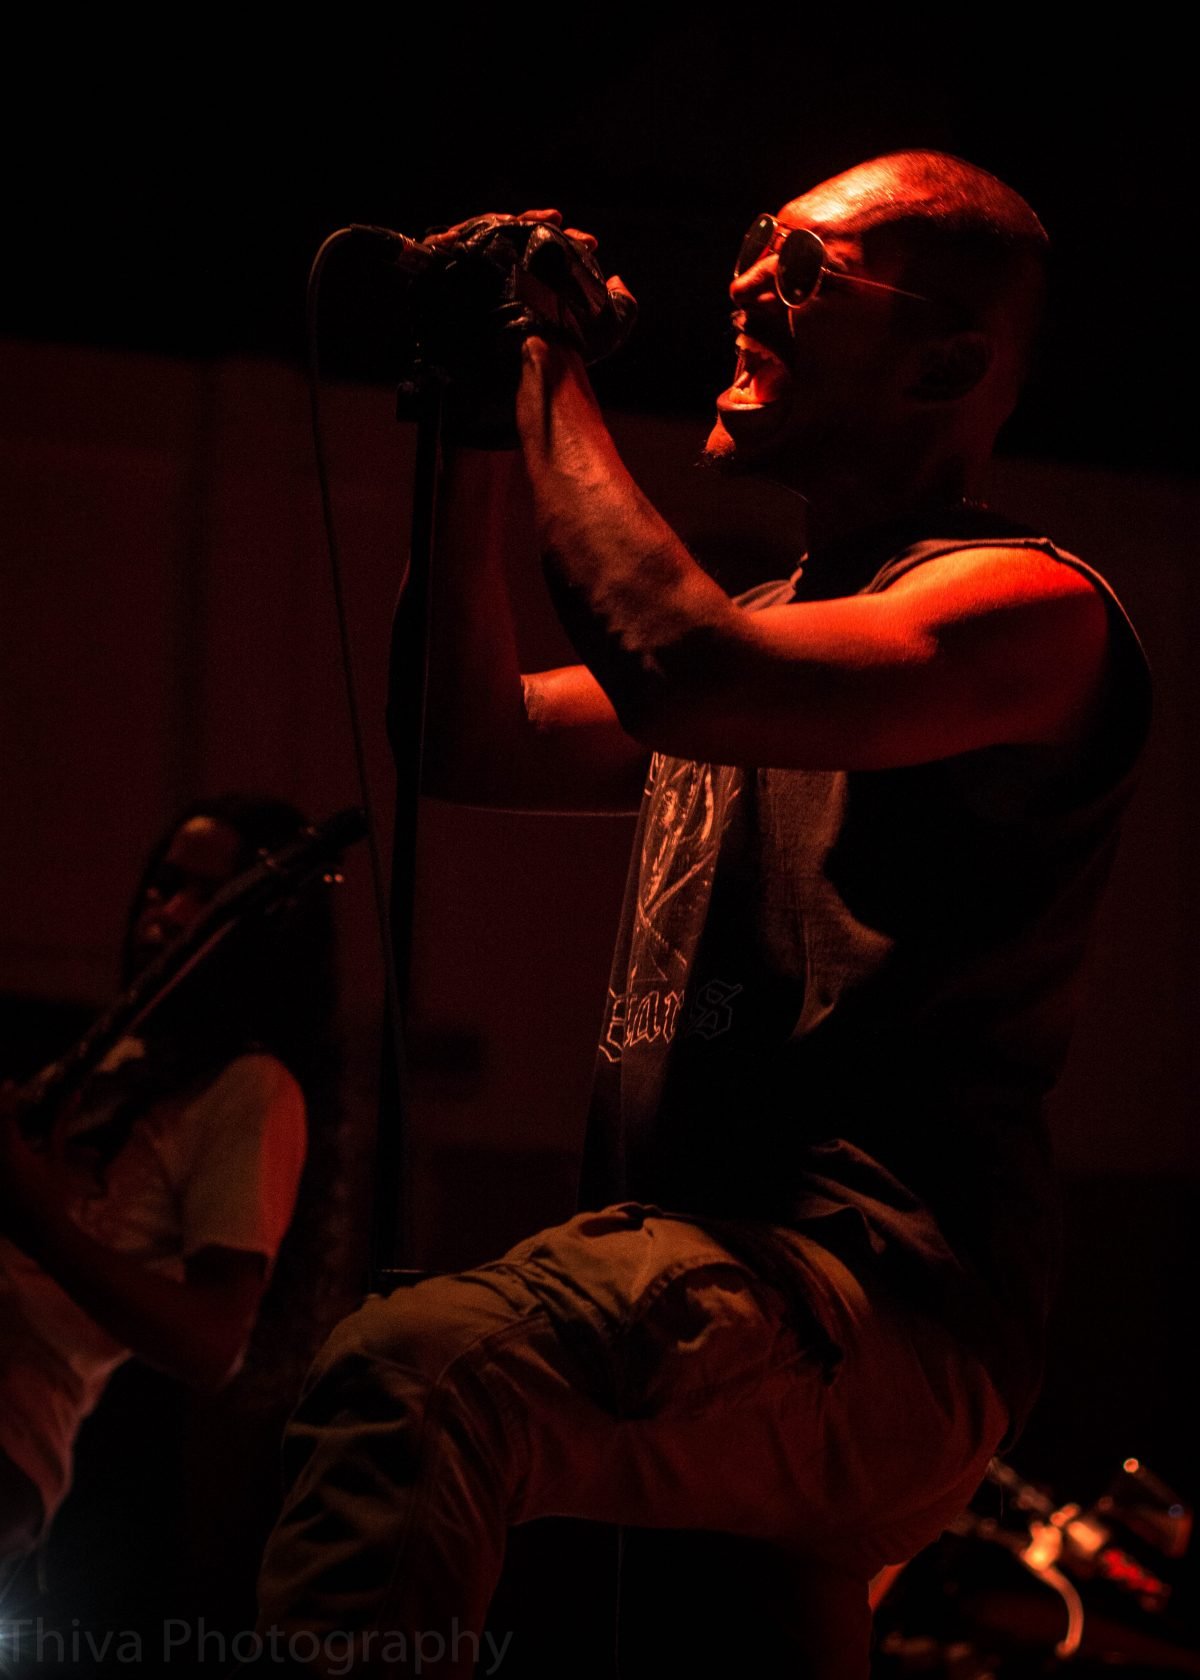 Chathuranga Fonseka, frontman of Funeral In Heaven: “Ultimately, black metal will forever be an outsider’s preference. It (especially the sound) always has demanded an acquired taste. Even if it is being accepted by common society (like how the Norwegian government suddenly recognised the potential of the highest cultural export in its own country, which was black metal in the 90s, they started promoting it along with the media and eventually went to the masses and became something "normal"), someone will find a way to up the ante, push the boundaries a little further and create a niche within the already existing niche, because one thing we humans will not run out of is new ideas."